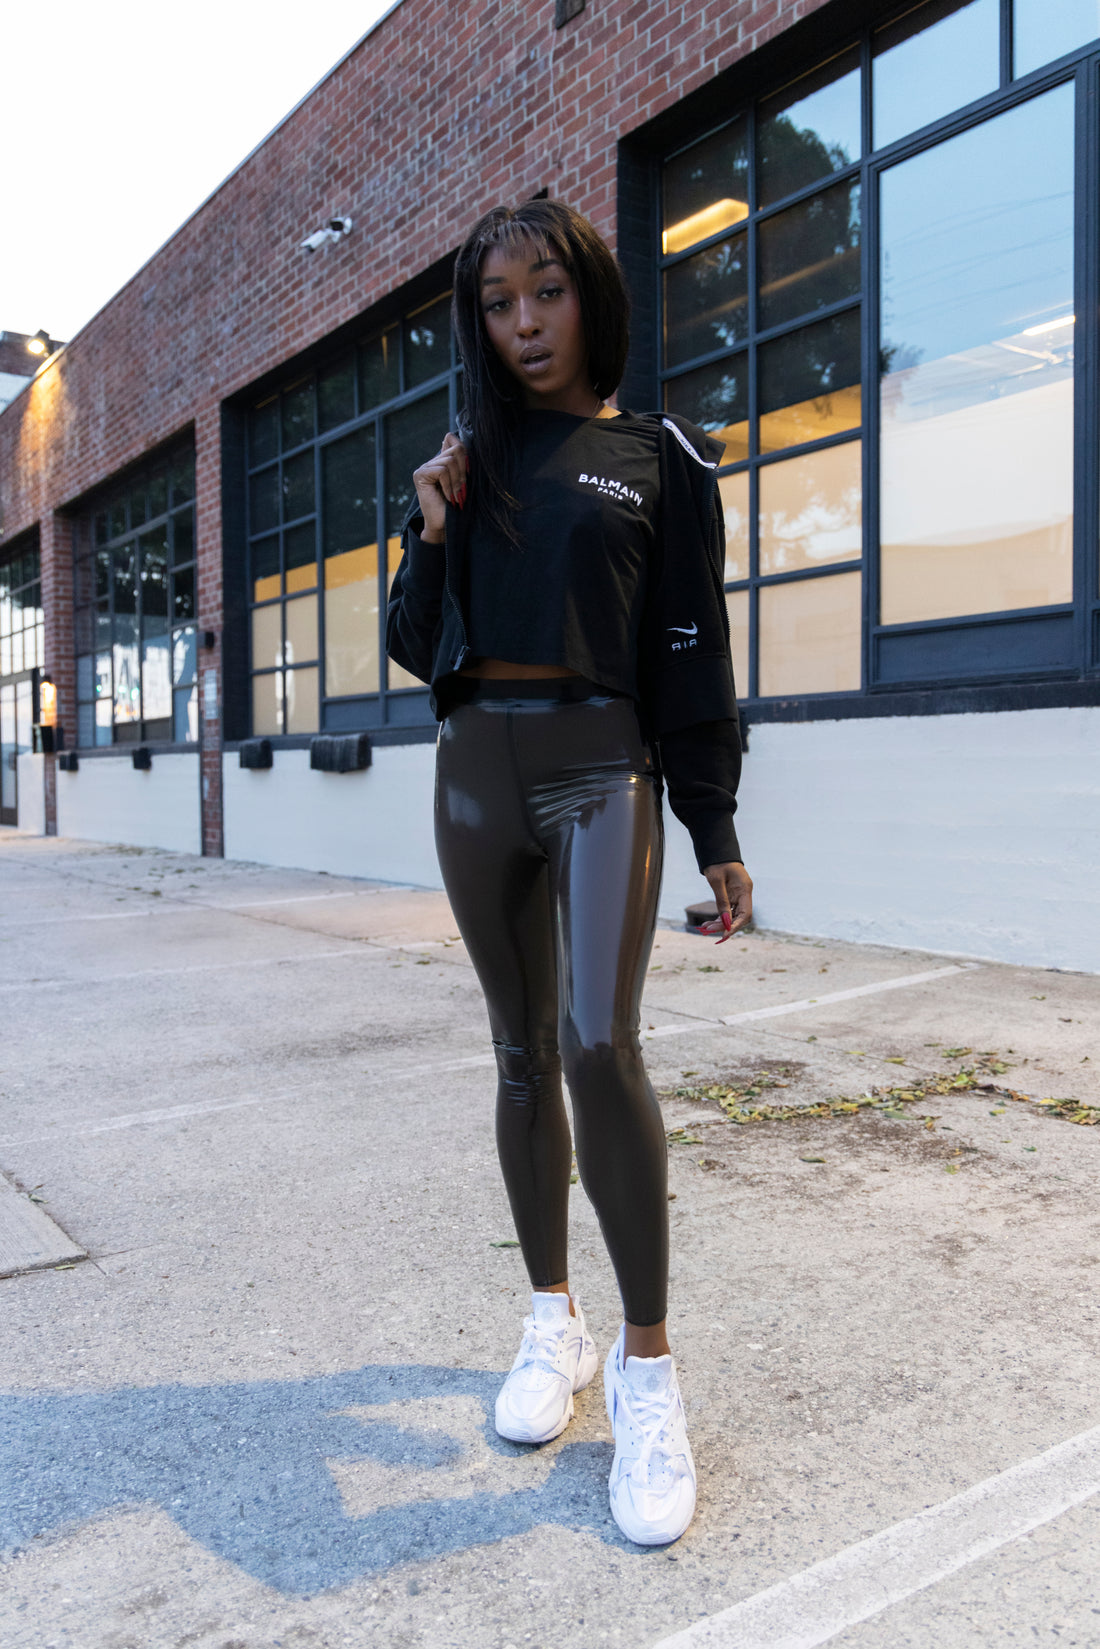 Jheanelle Corine posing in her transparent and black latex leggings in public